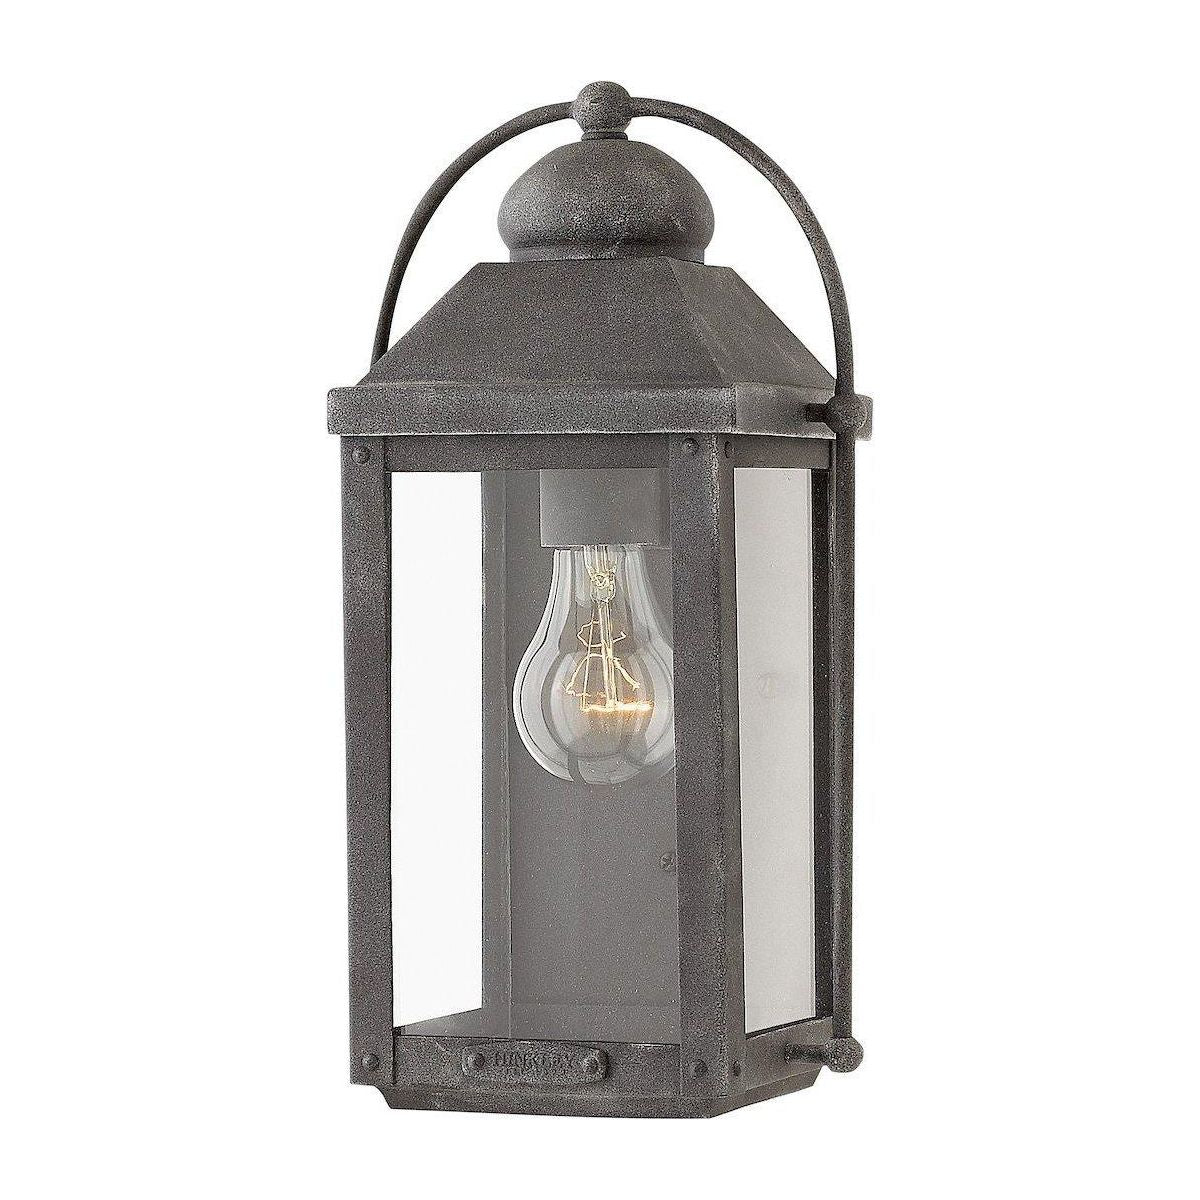 Hinkley - Anchorage Outdoor Wall Light - Lights Canada